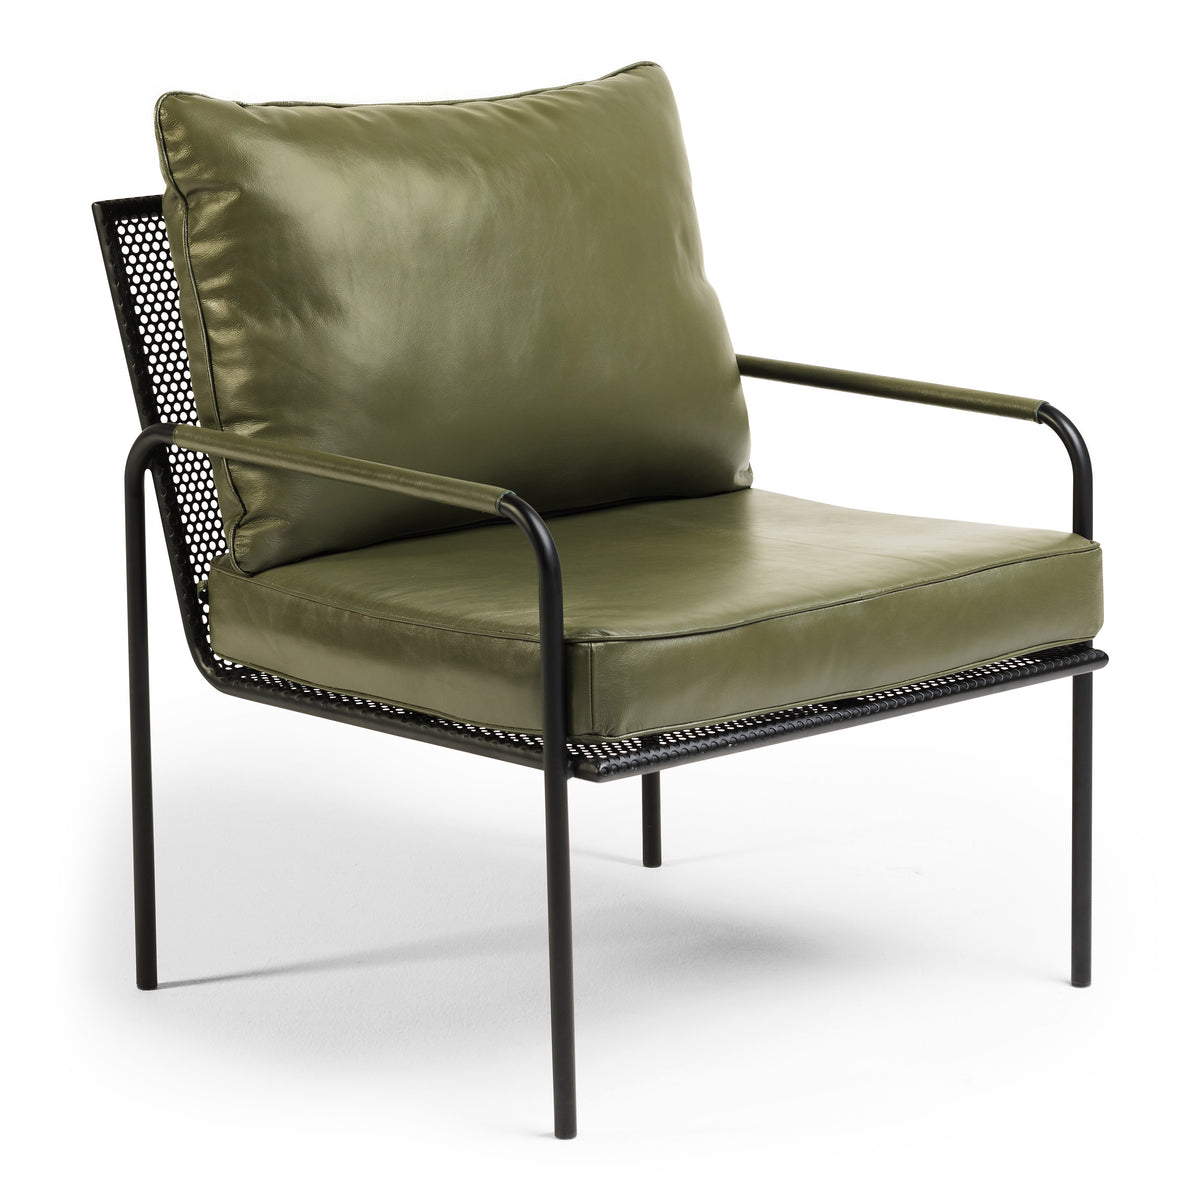 Fitzroy Armchair - Olive